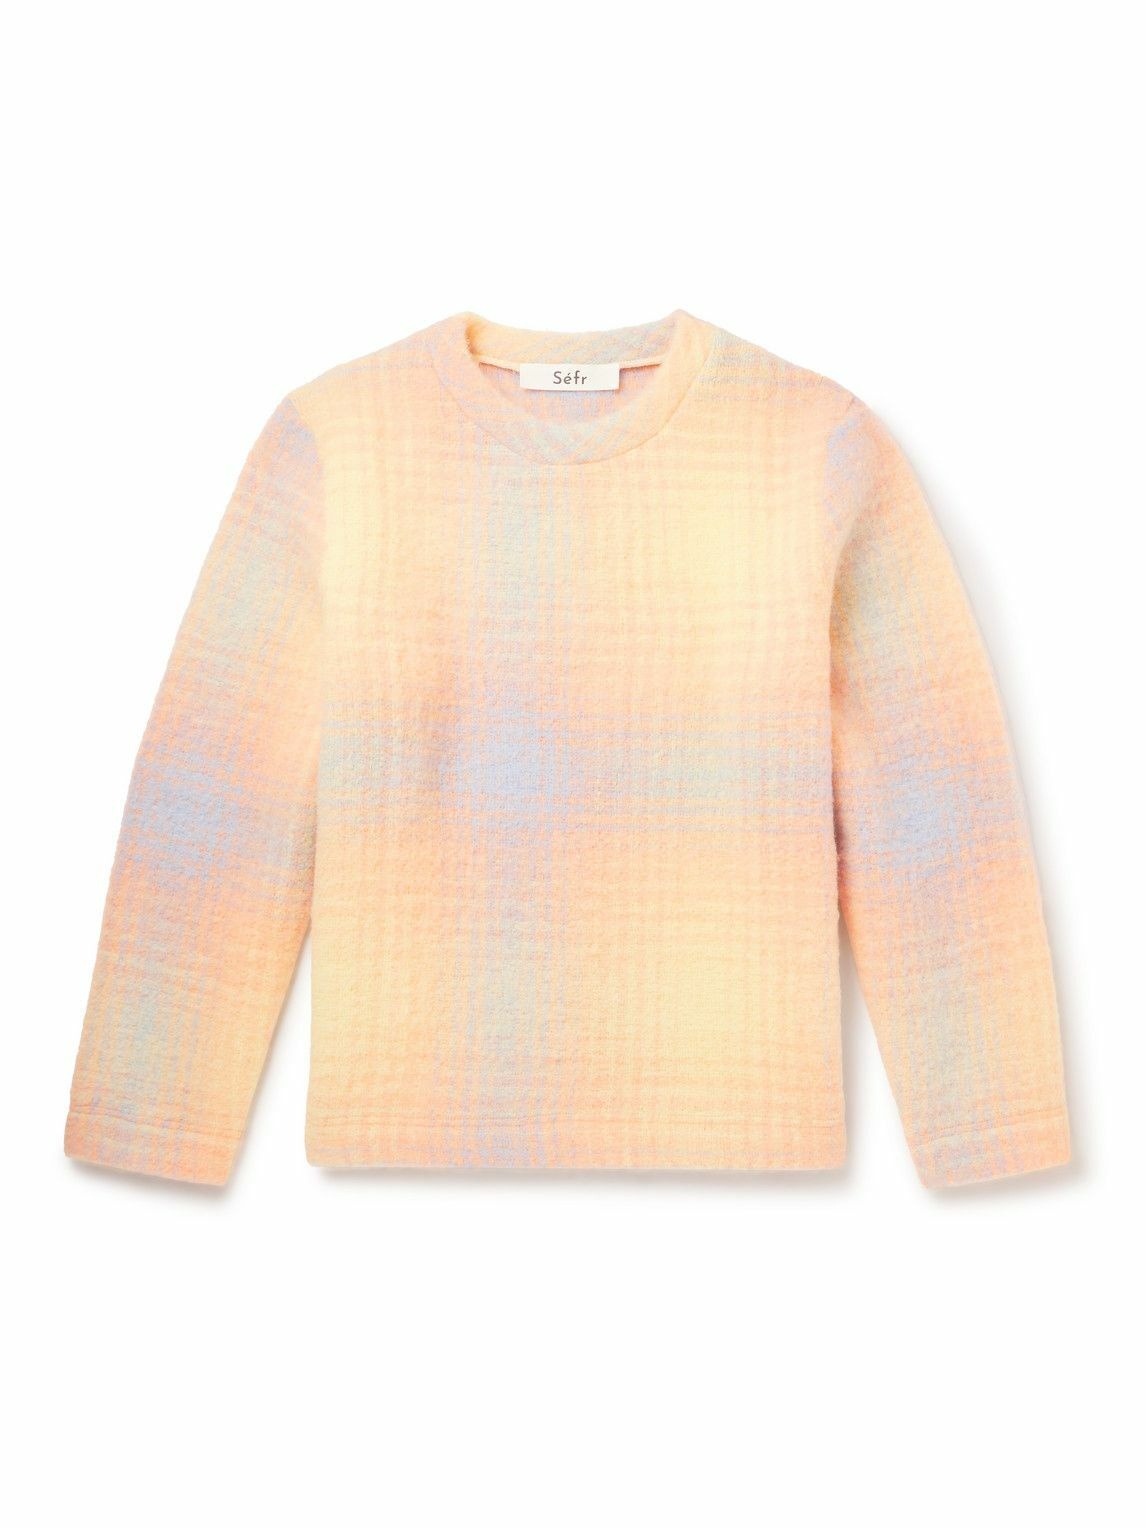 Photo: Séfr - Florence Printed Wool-Blend Sweater - Yellow